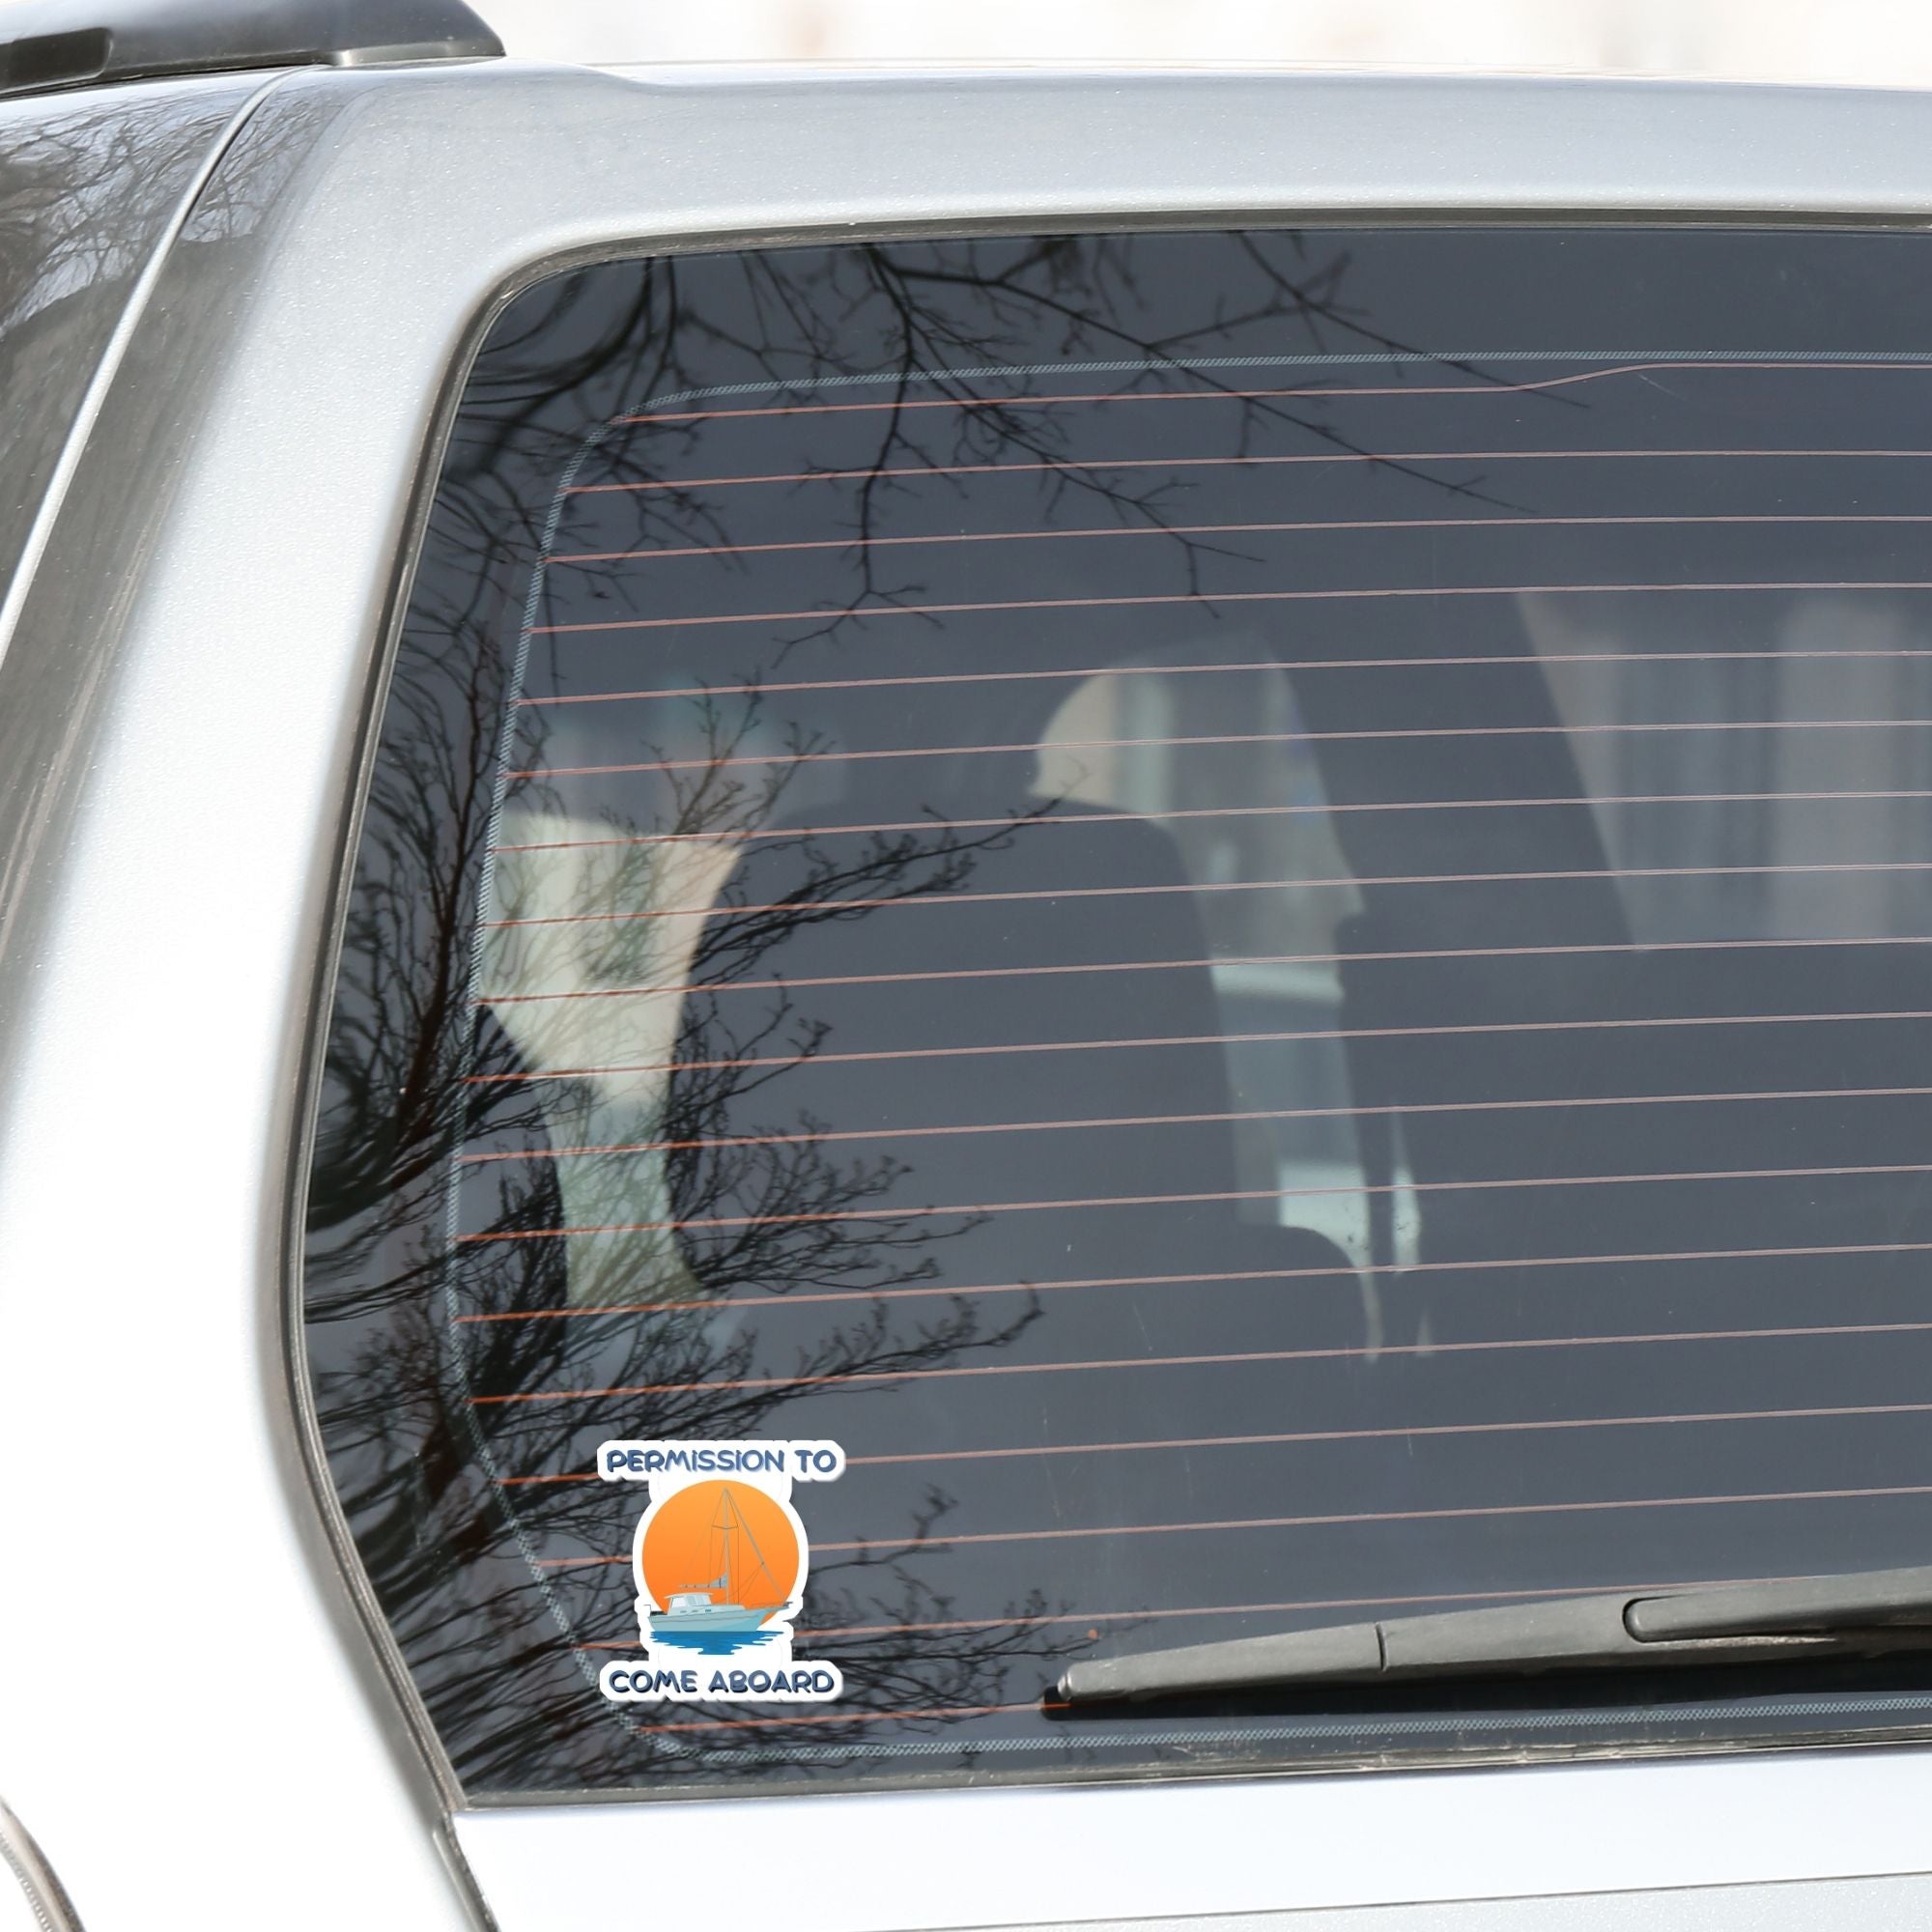 Ahoy Captain, permission to come aboard? This individual die-cut sticker has an anchored sailboat against a beautiful sunset. Perfect for sailors and boaters, this sailing sticker just feels relaxing! This image shows the Permission to Come Aboard sticker on the back window of a car.